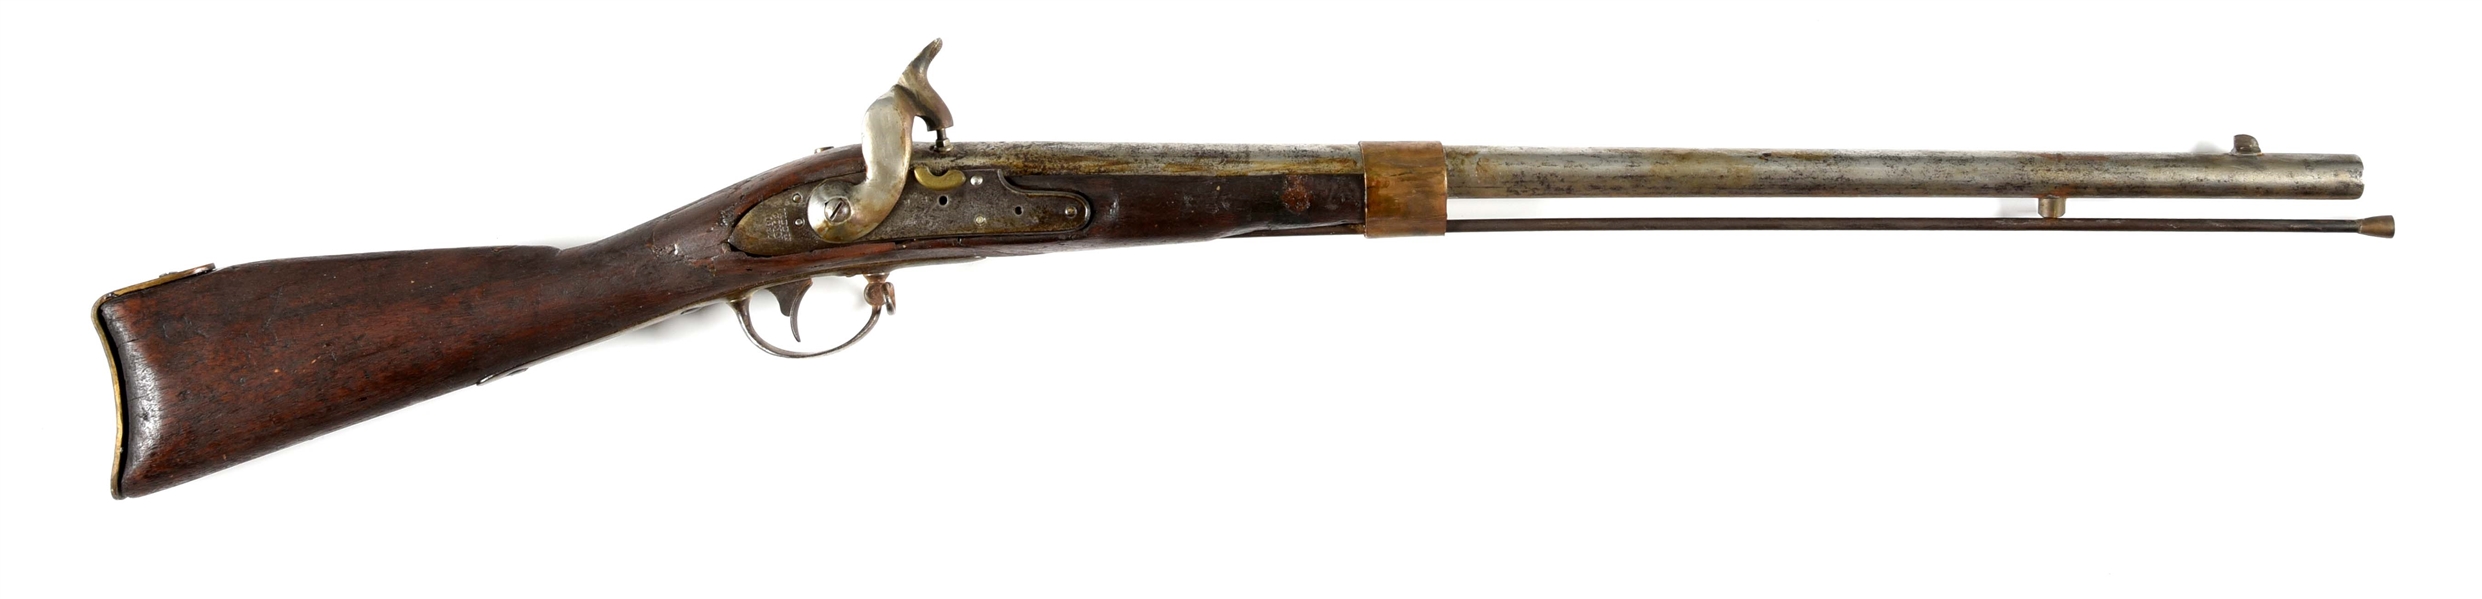 (A) MODIFIED 1816 CONTRACT PERCUSSION MUSKET BY STARR.